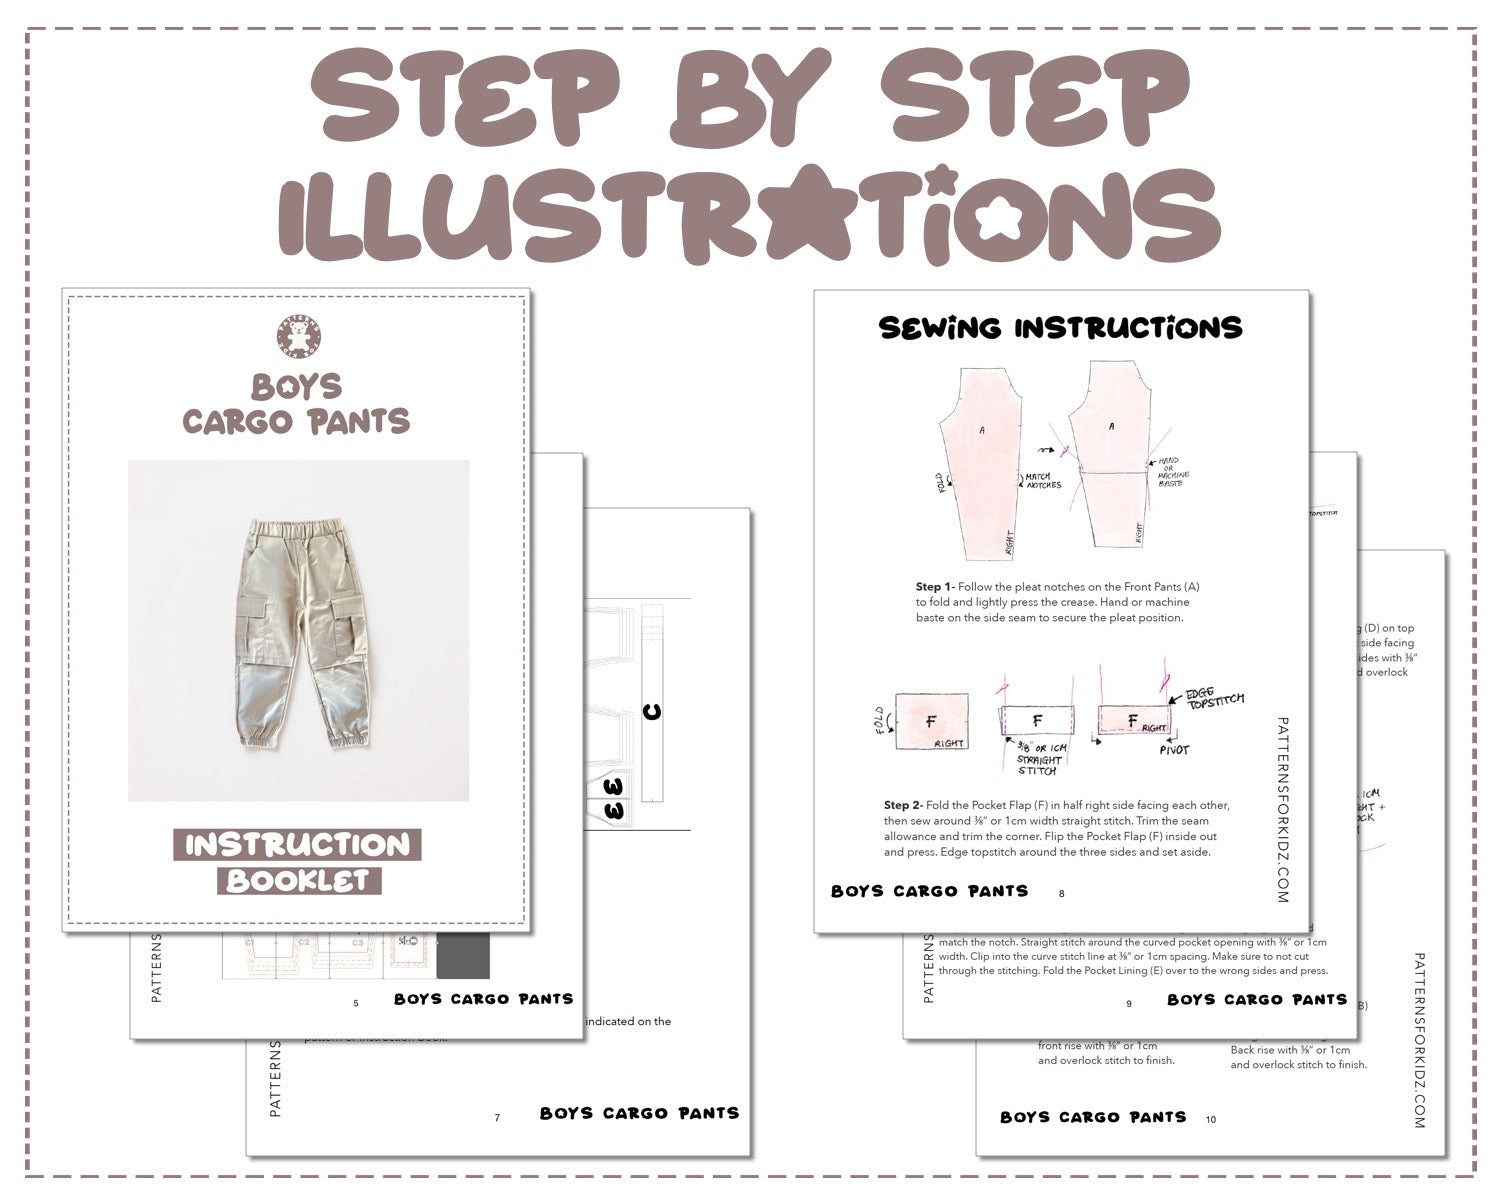 Boys Cargo Pocket Pants sewing pattern step by step illustrations.